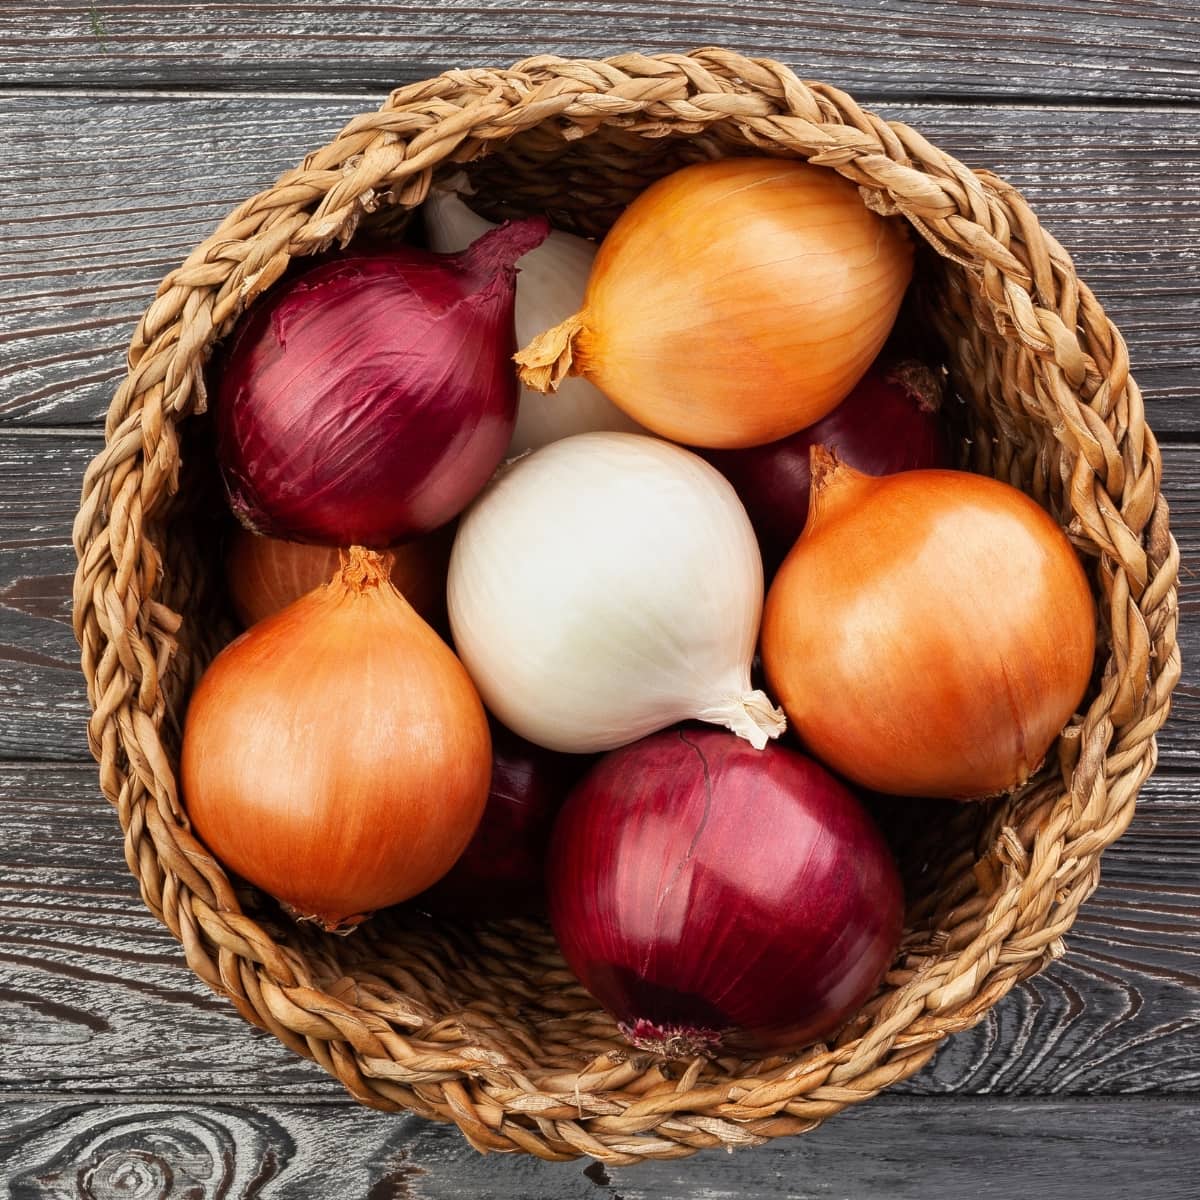 Different Types of Onions in a Basket
